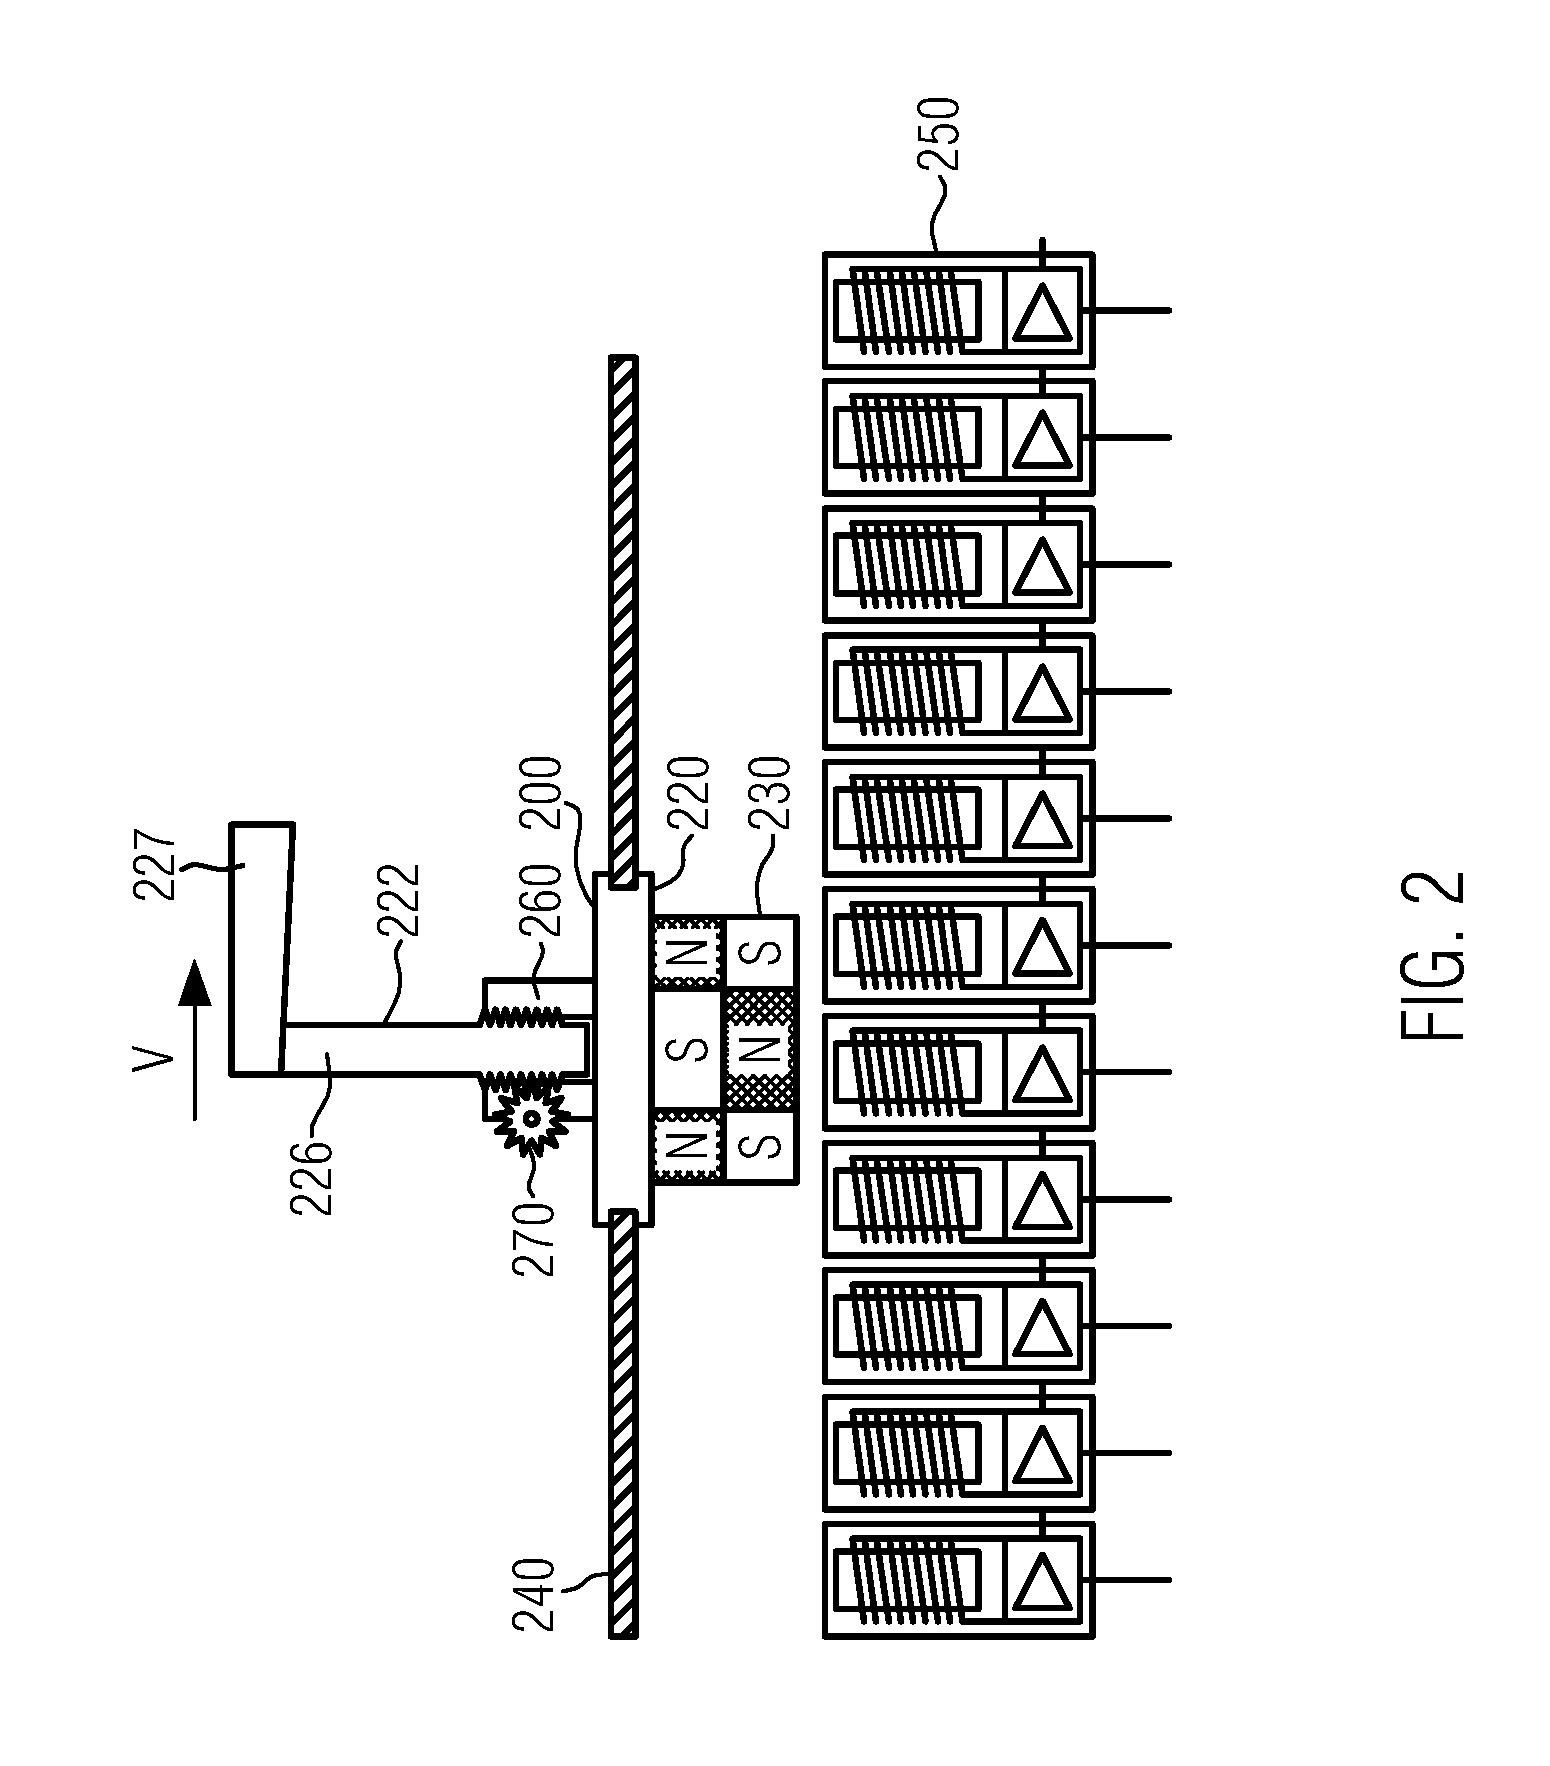 Device and Method for Distributing and Grouping Containers